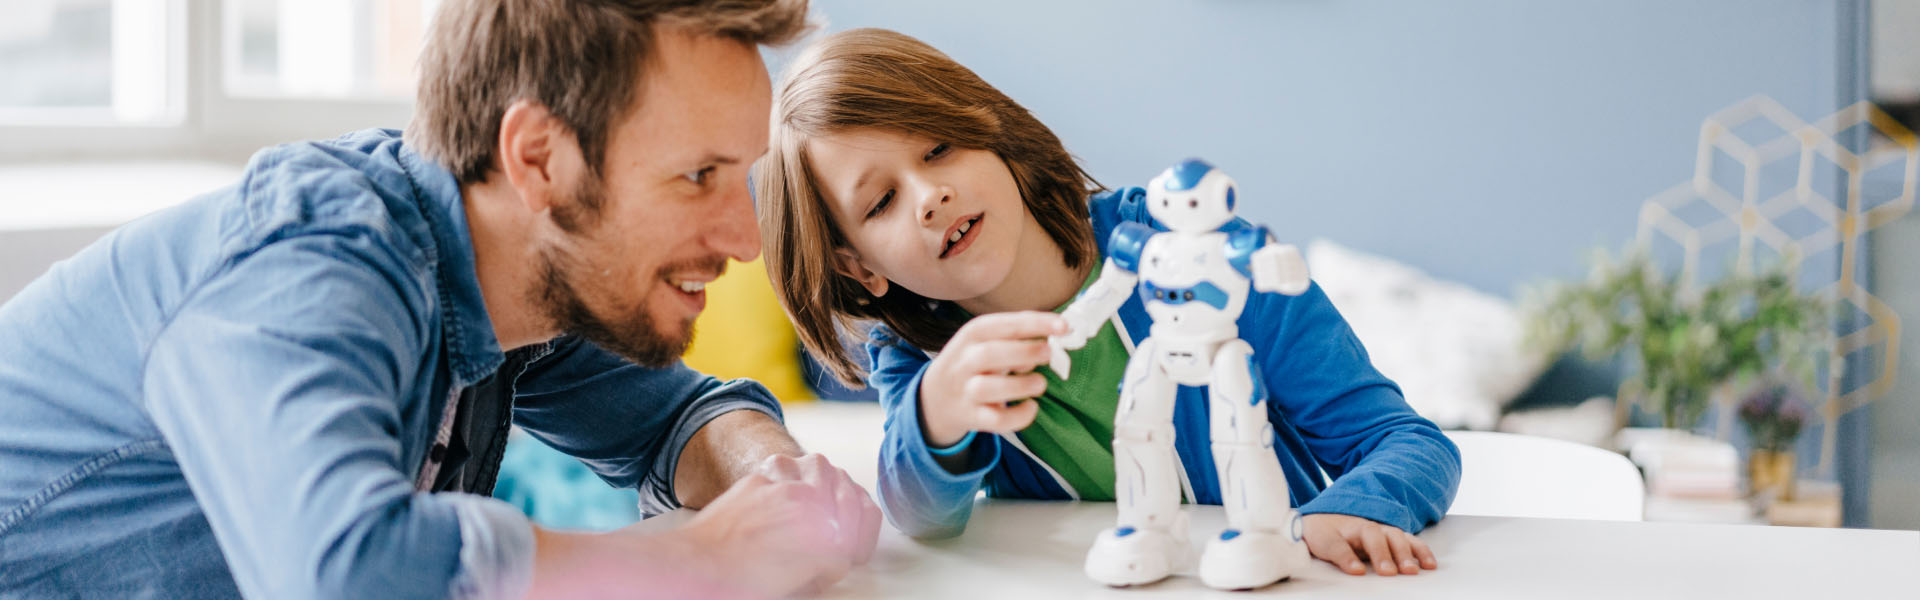 A young child is playing with a robot toy.	